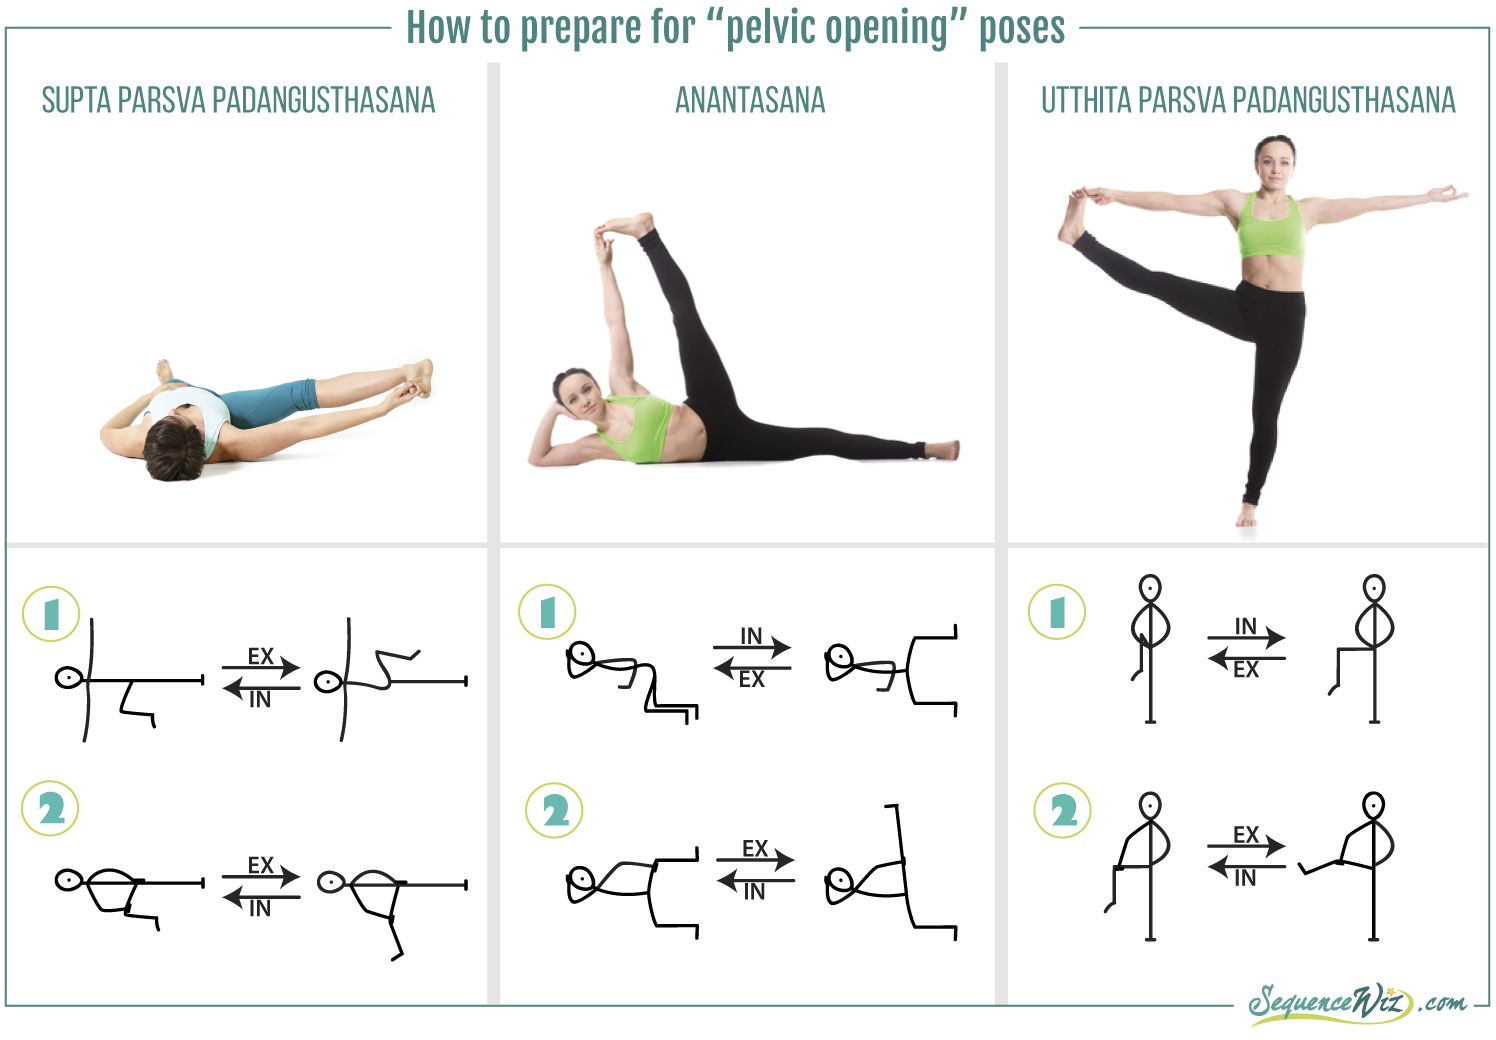 Essential Sequence: Fold into Lotus Pose